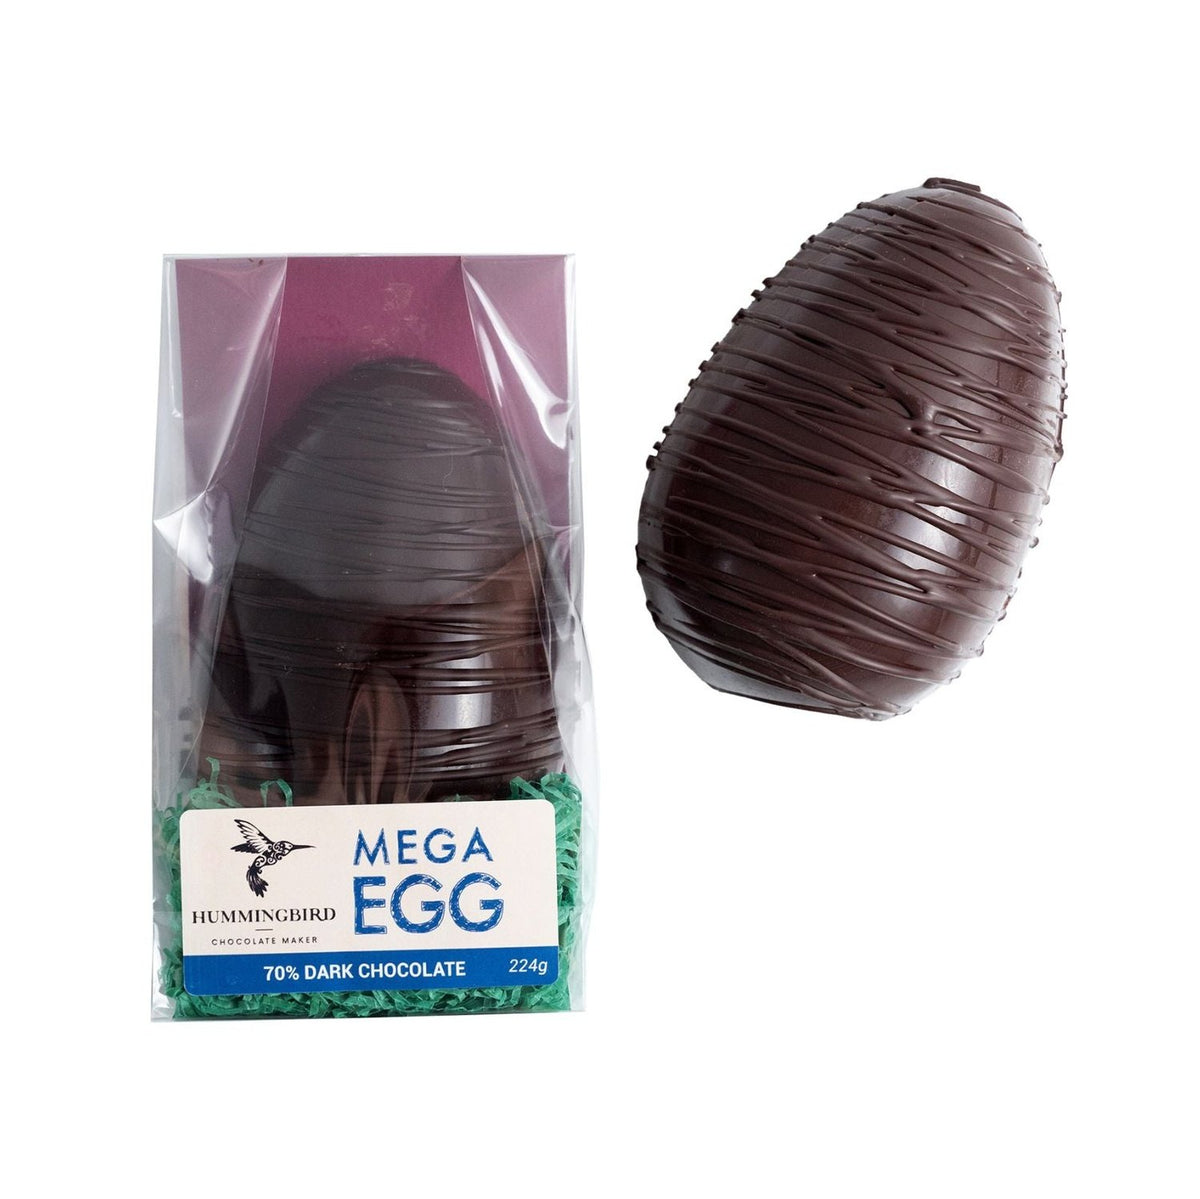 Large chocolate Easter egg, shown with and without packaging